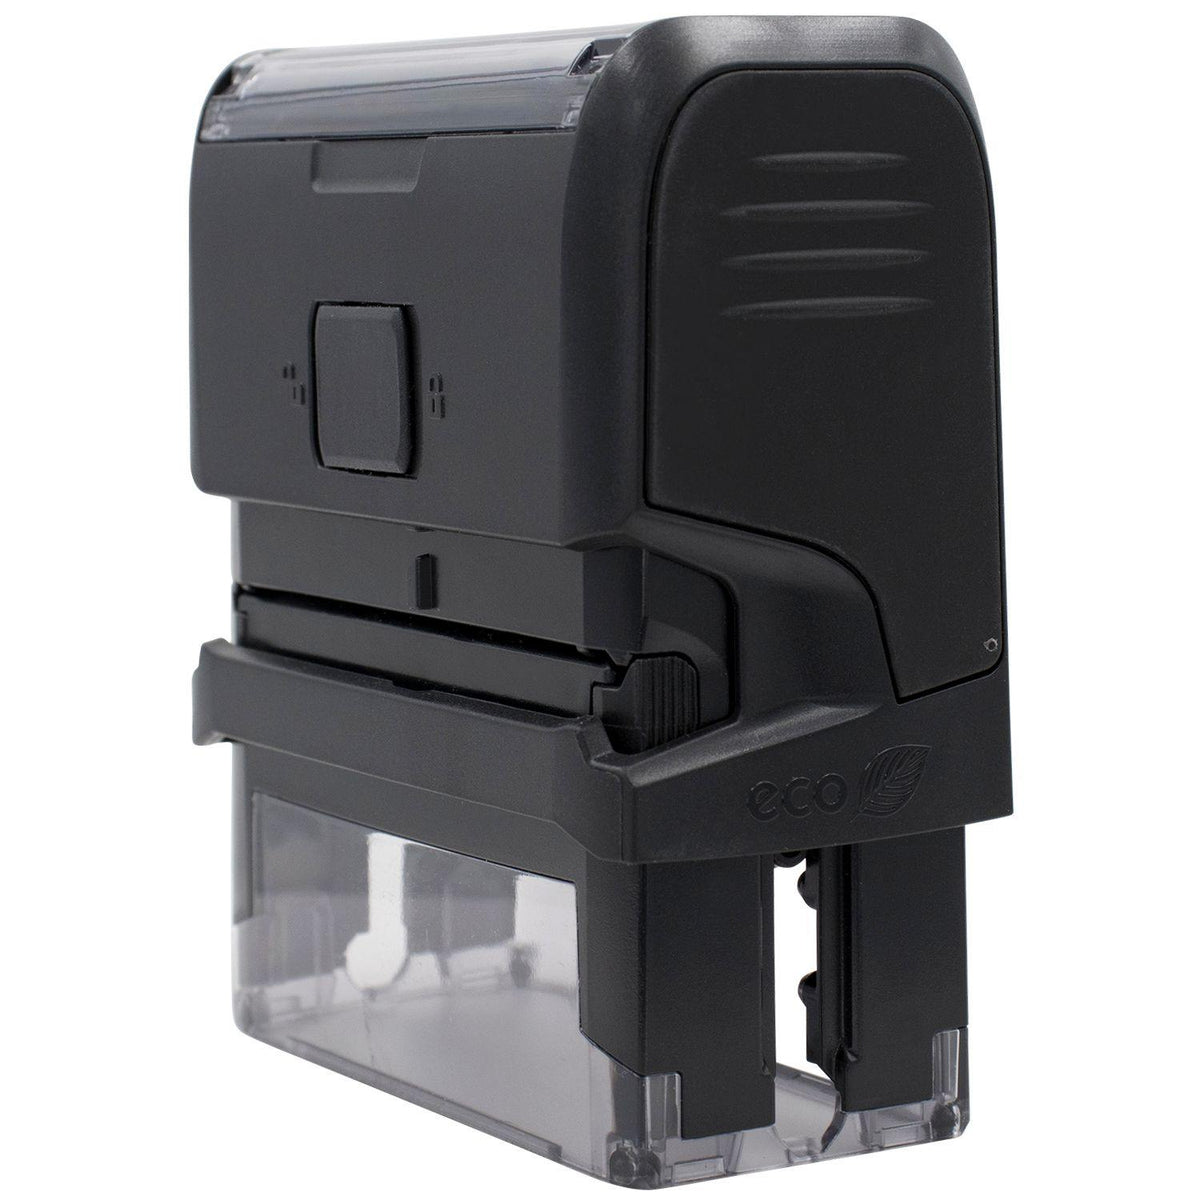 Self Inking Verified Stamp - Engineer Seal Stamps - Brand_Trodat, Impression Size_Small, Stamp Type_Self-Inking Stamp, Type of Use_Office